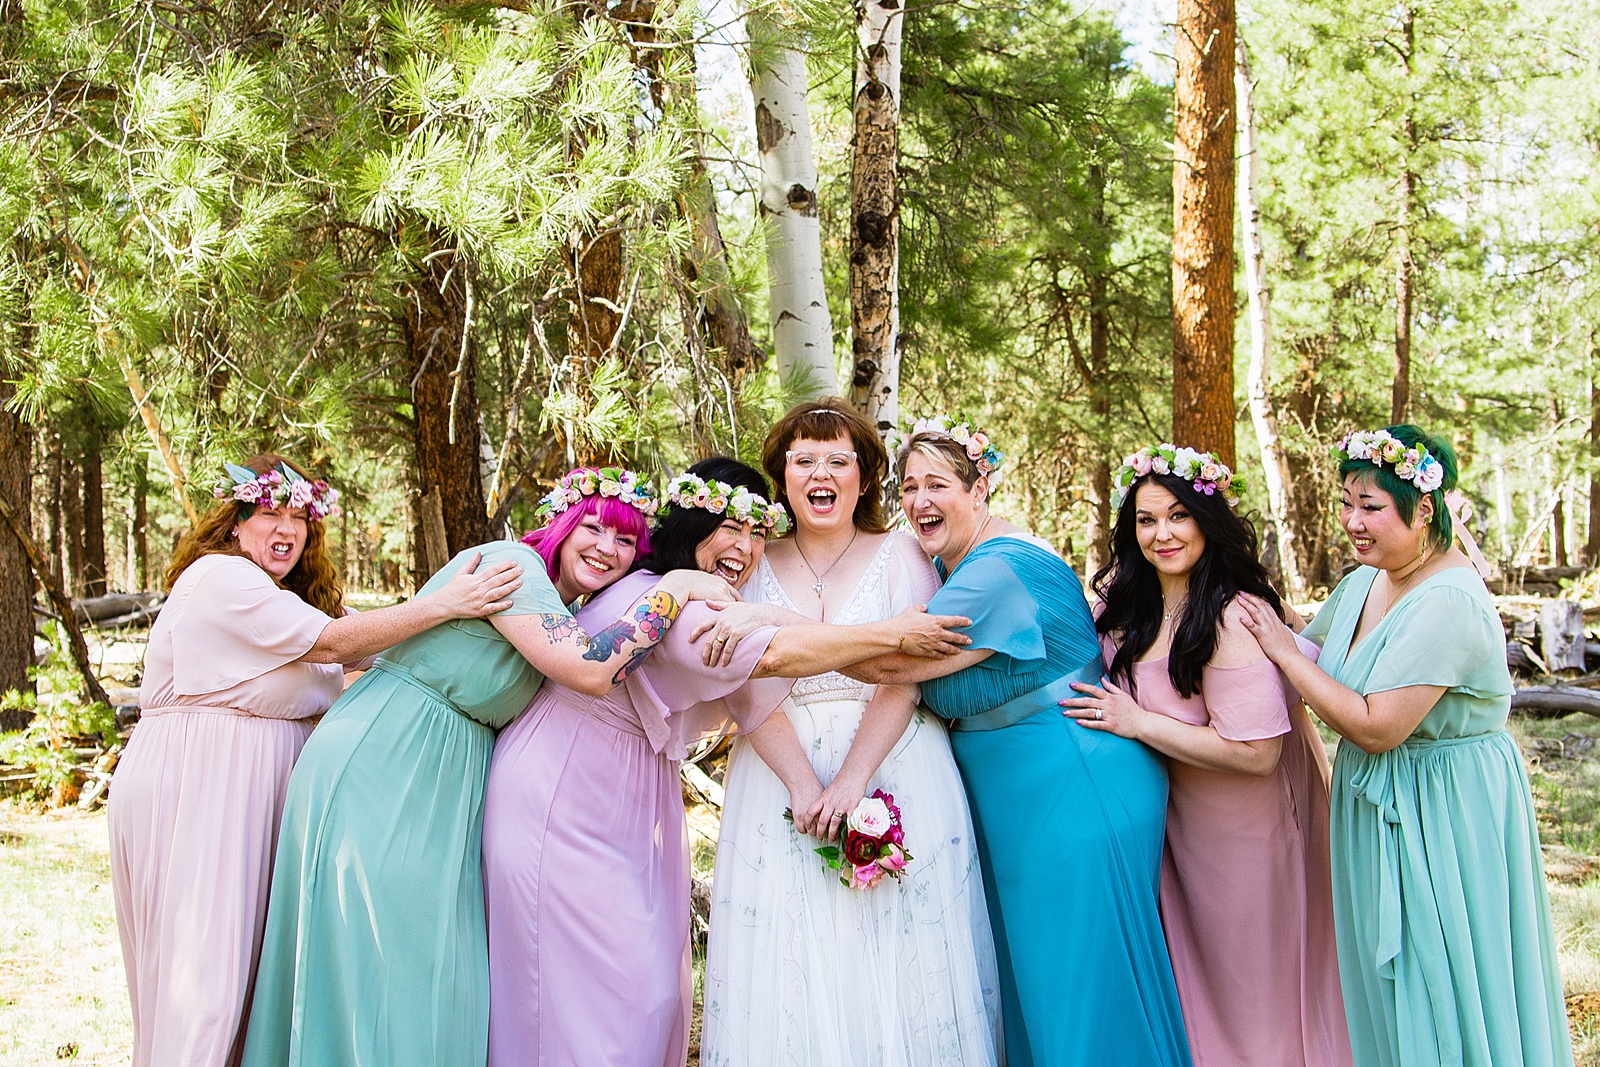 Bride and their wedding party laughing together at a Arizona Nordic Village wedding by Arizona wedding photographer PMA Photography.